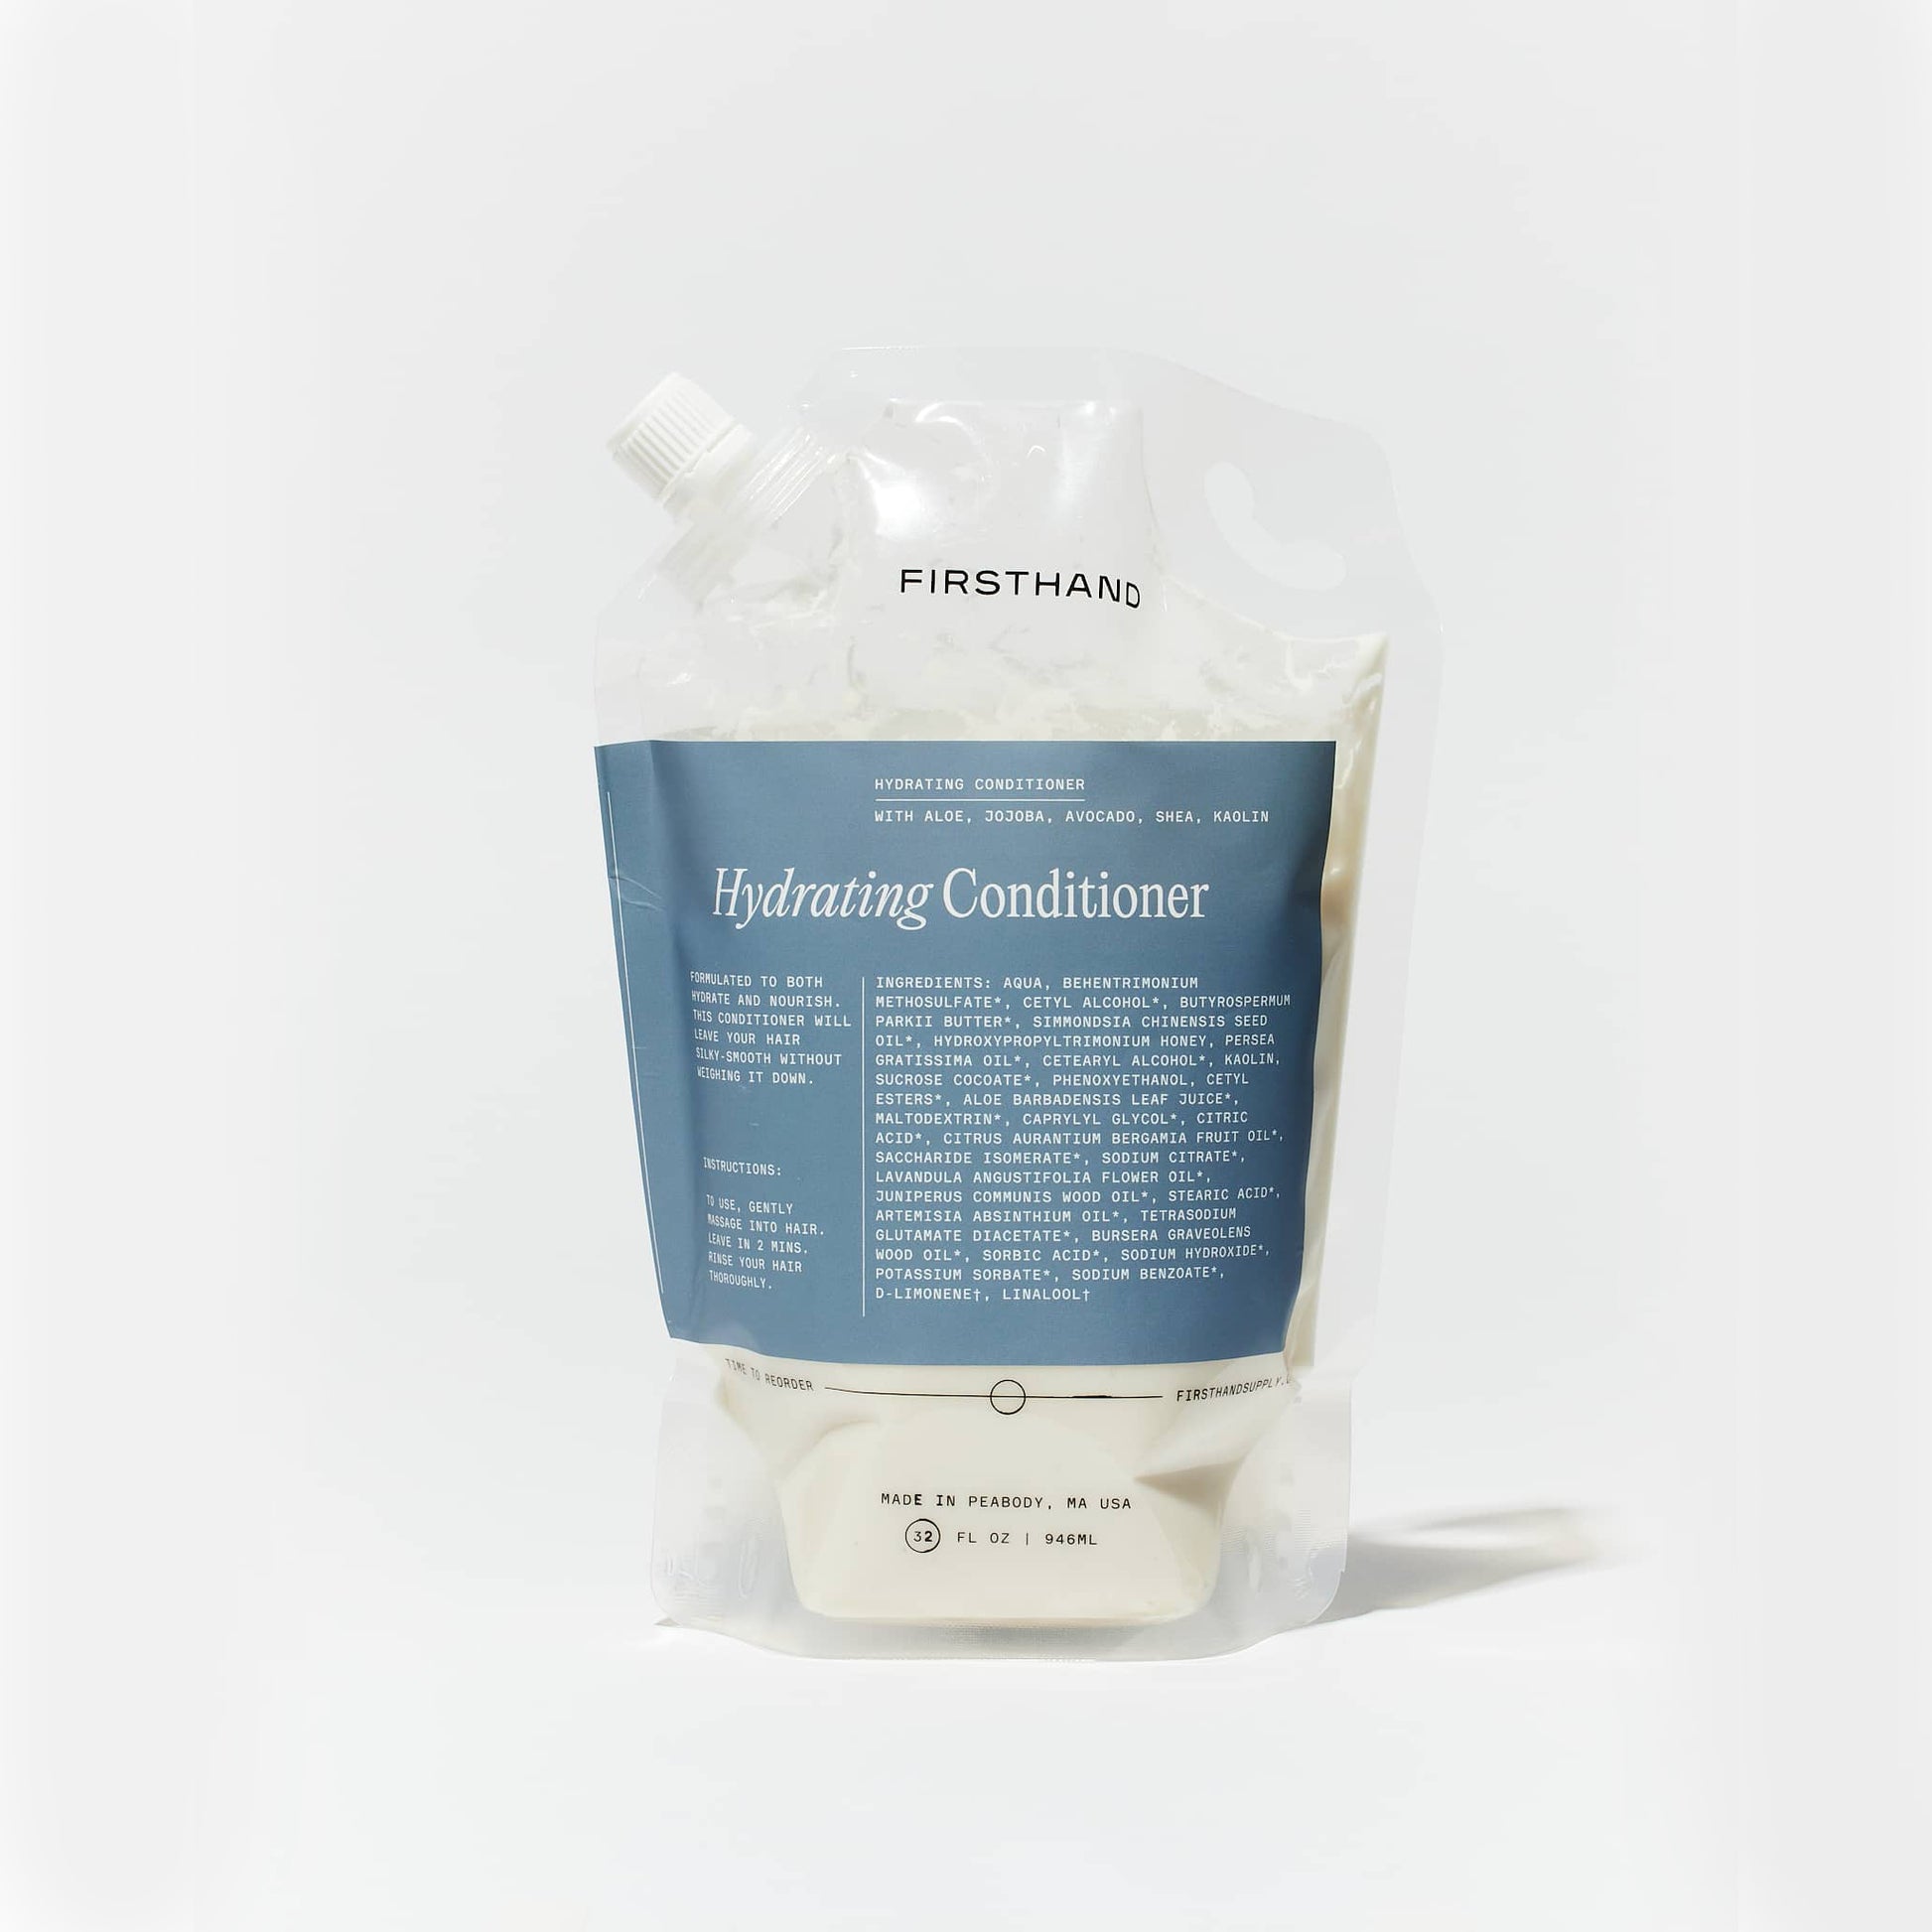 Firsthand Supply - Hydrating Conditioner Refill Pouch, 946ml - The Panic Room